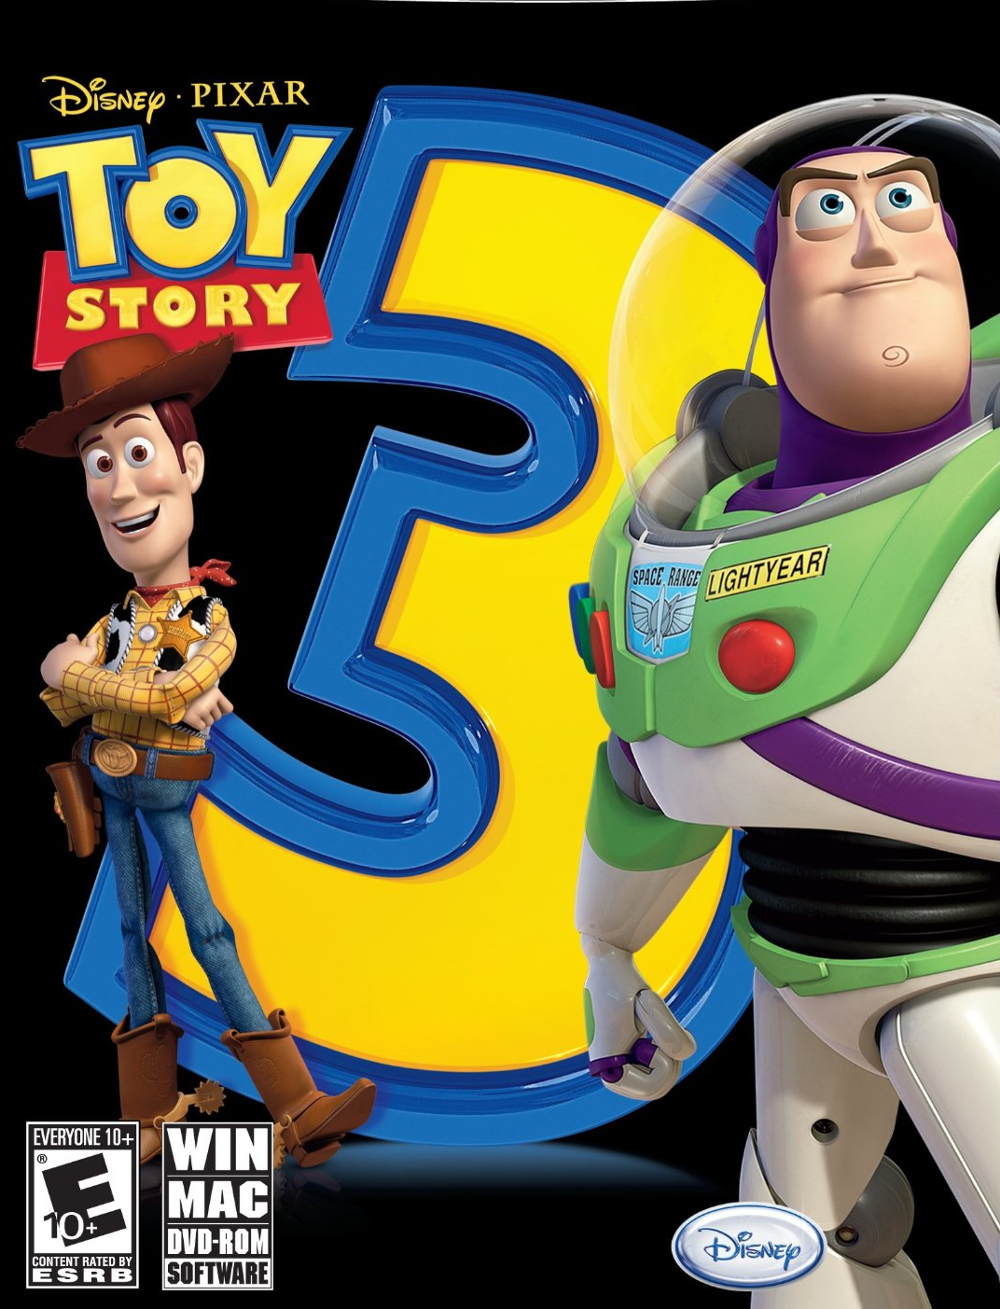 https://static.wikia.nocookie.net/disney/images/a/a0/Toy_Story_3_The_Video_Game.png/revision/latest?cb=20121014145402